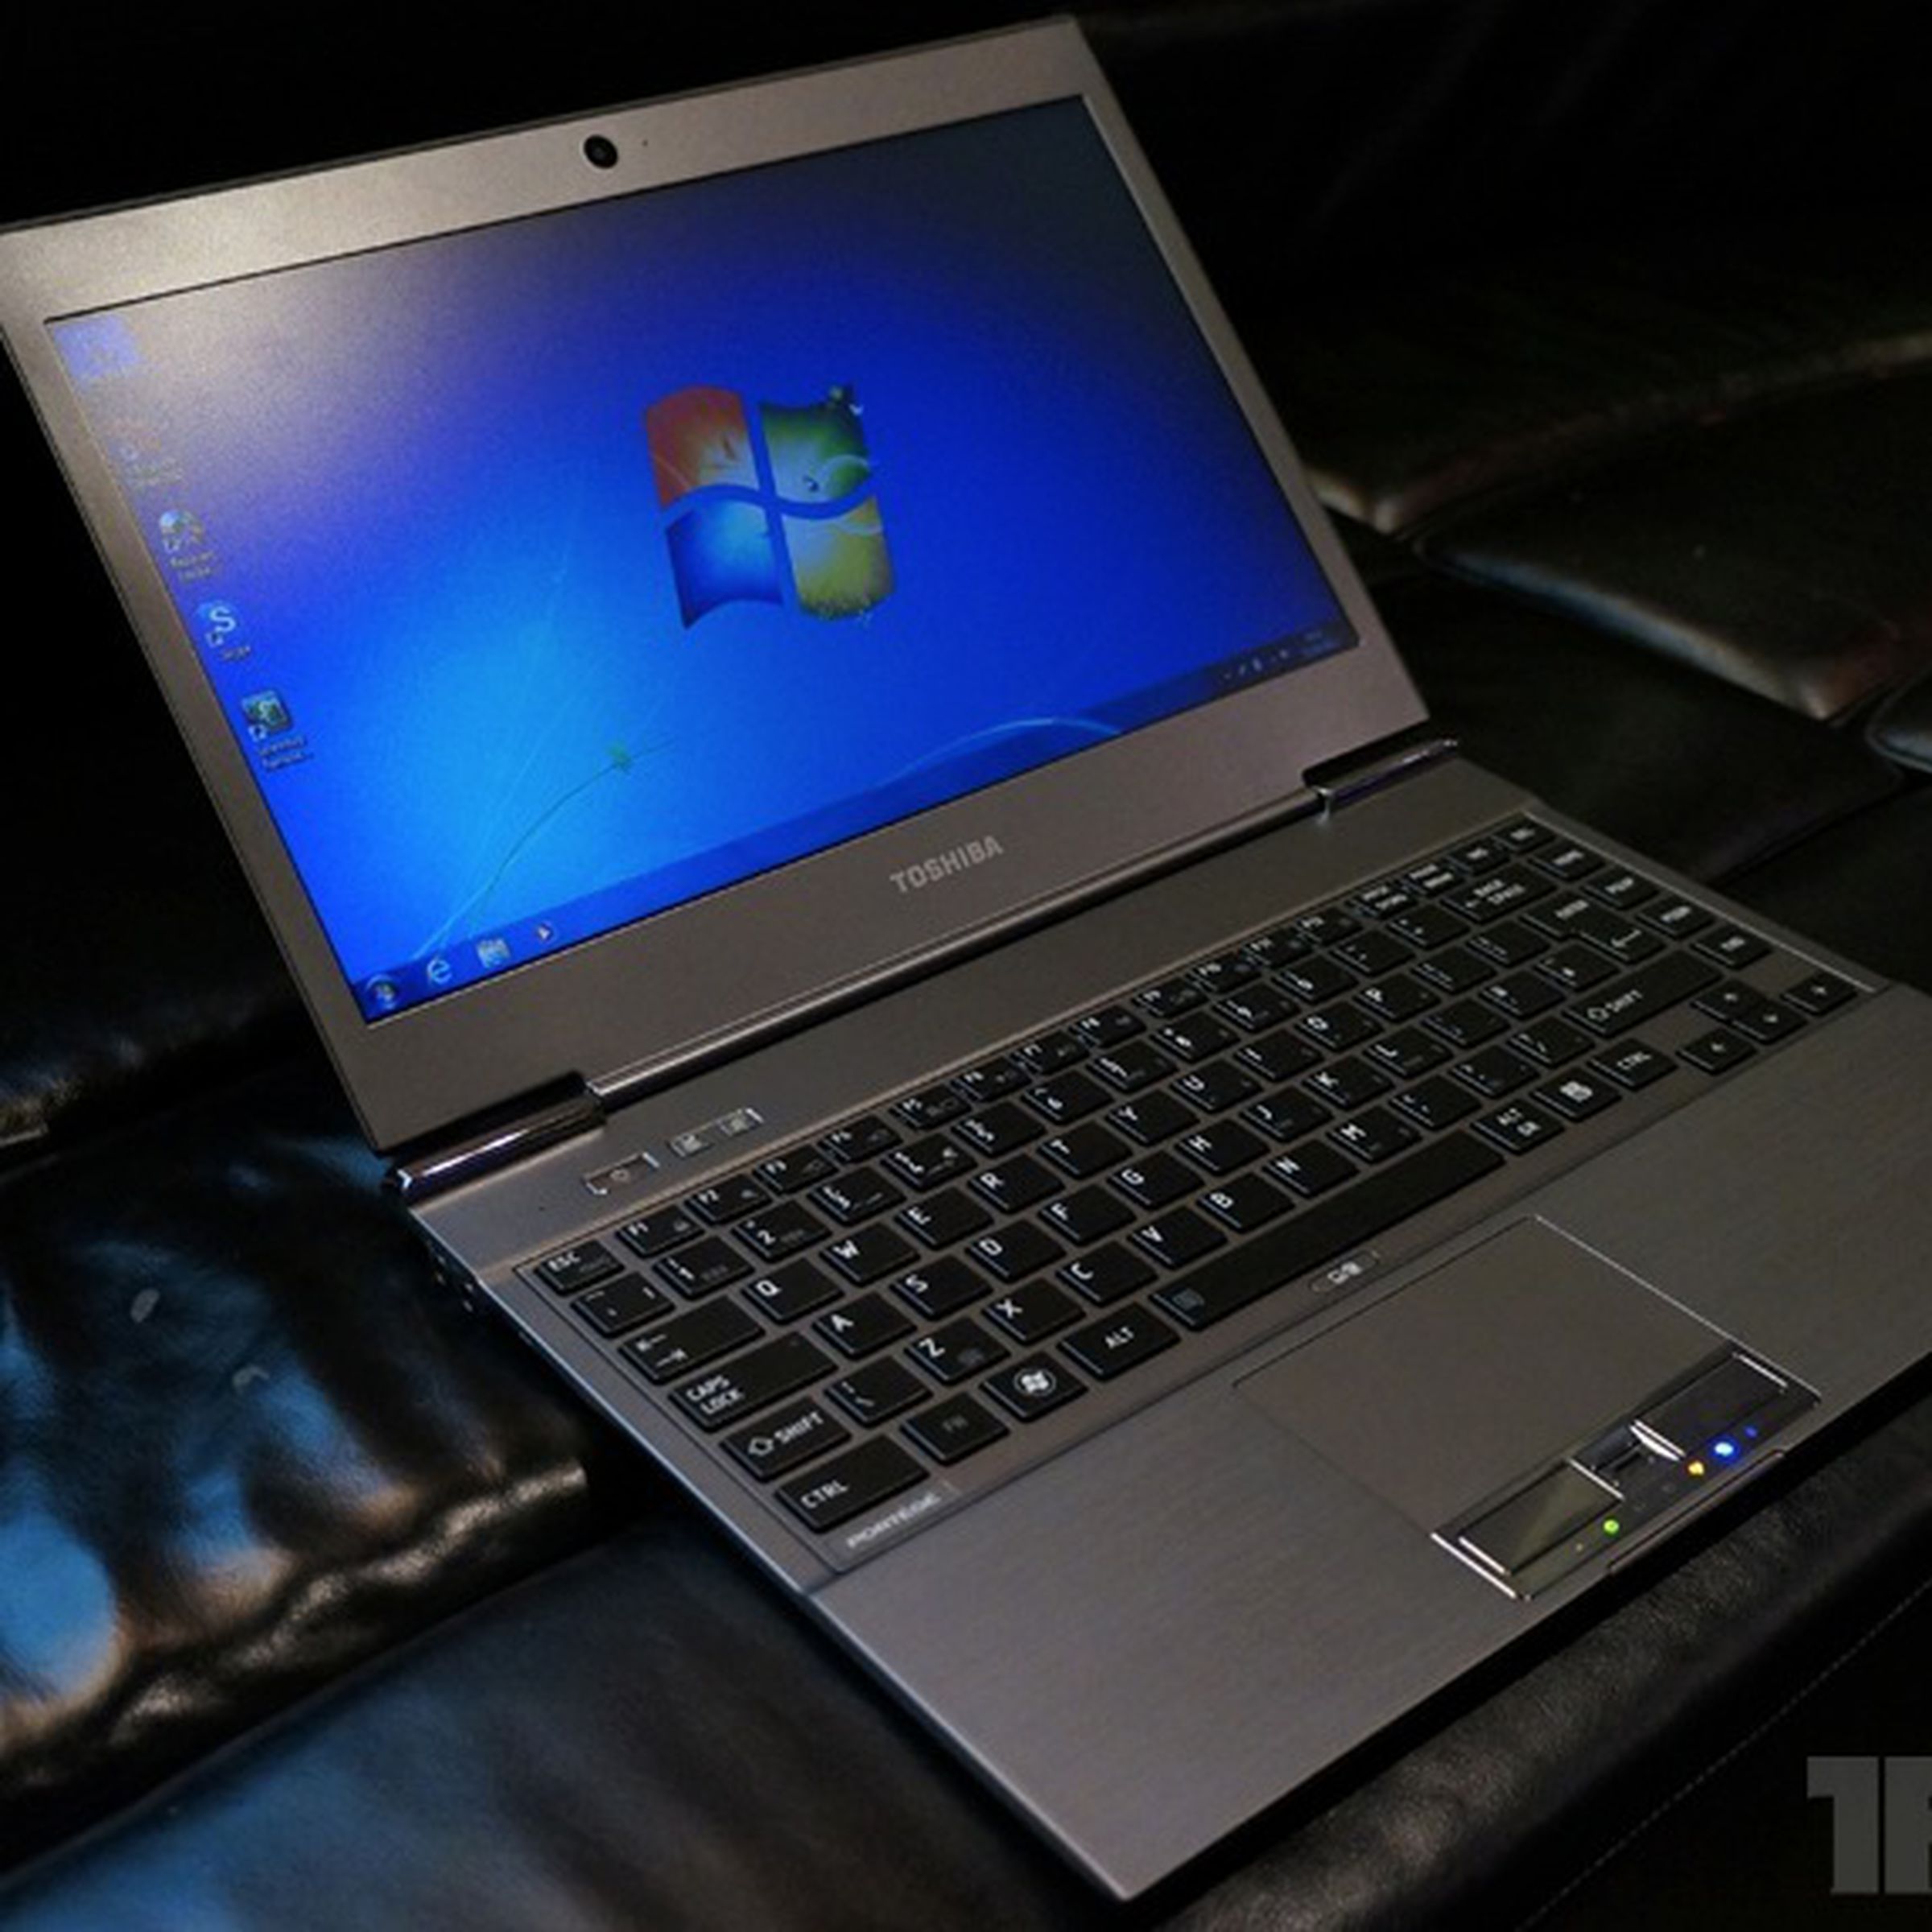 Gallery Photo: Toshiba Portege Z930 hands-on pictures